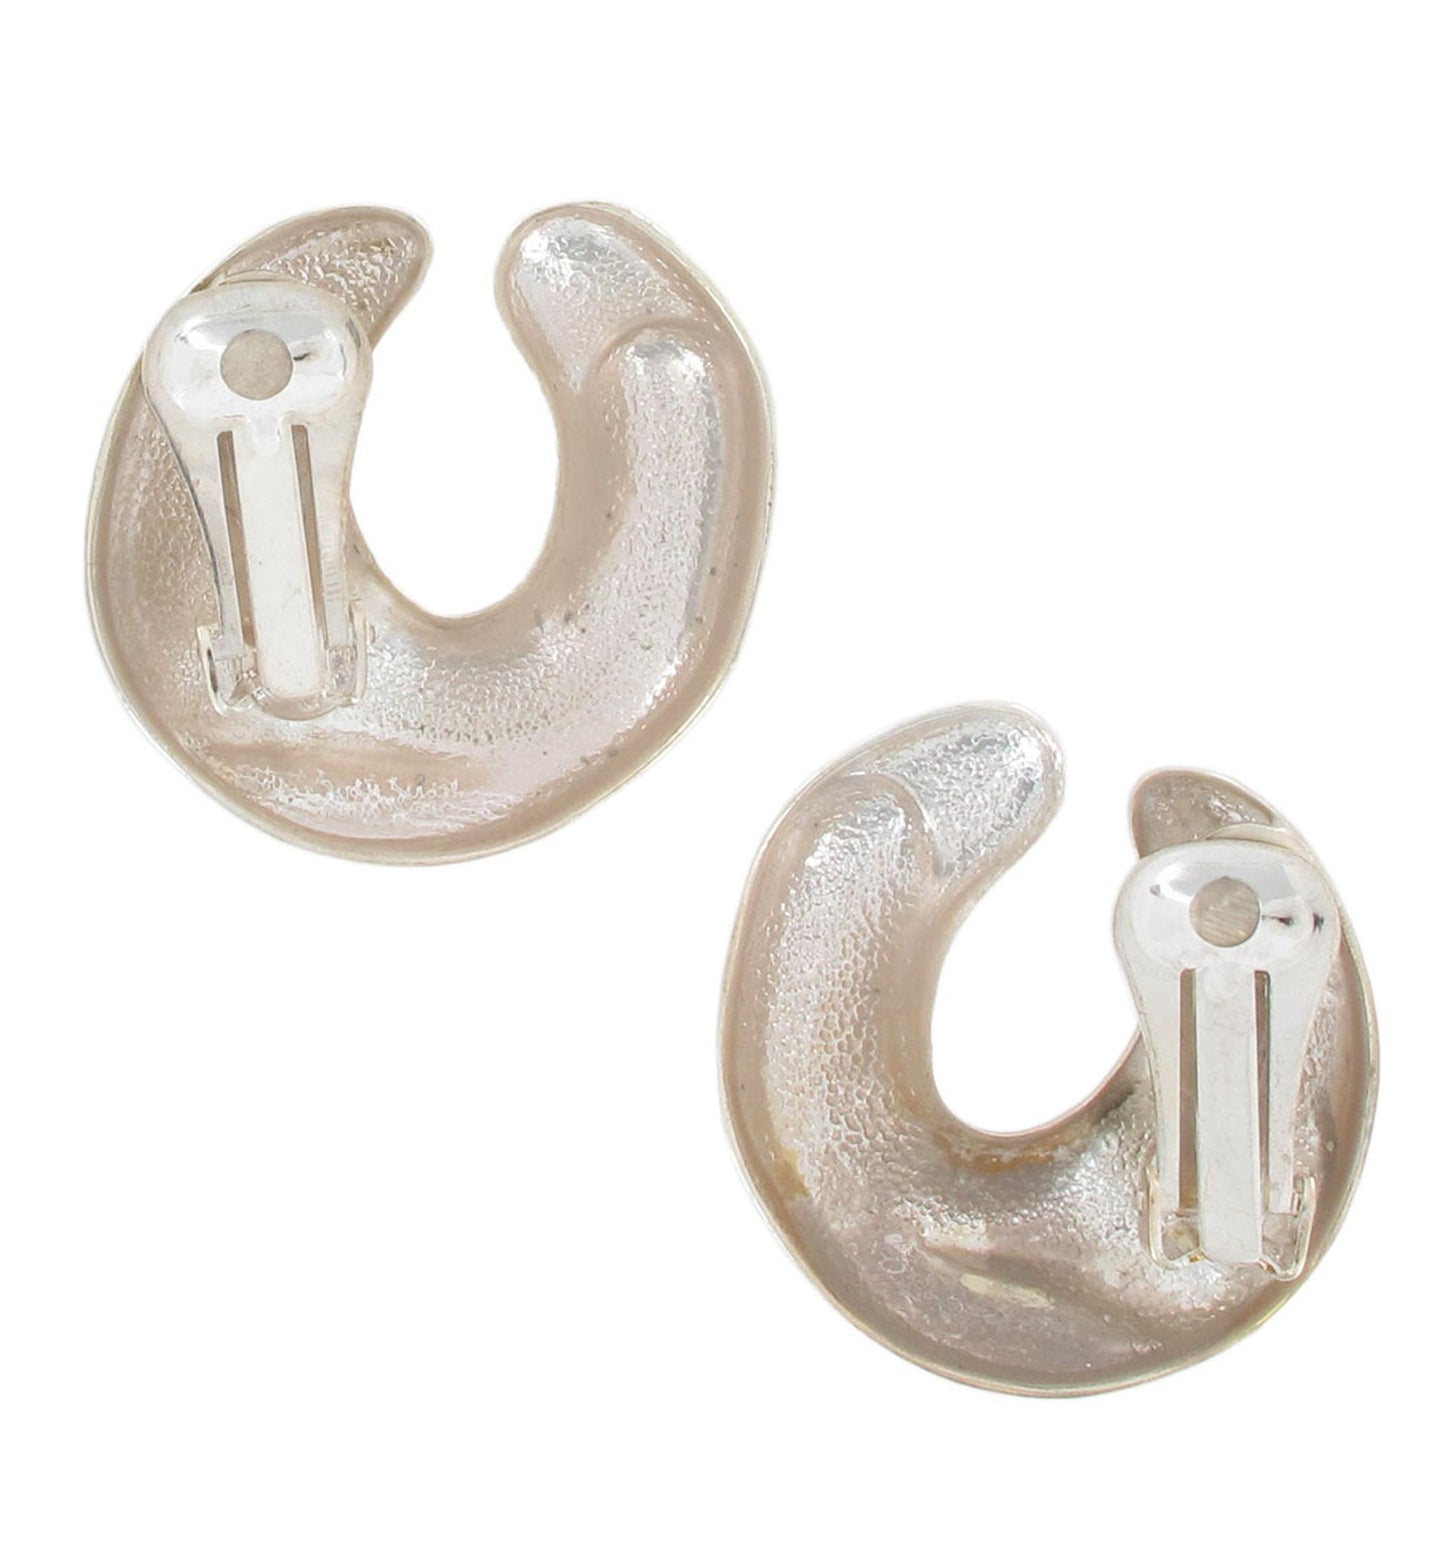 Clip On Earrings Biomorphic Abstract Horseshoe Silver Tone 1 1/4"